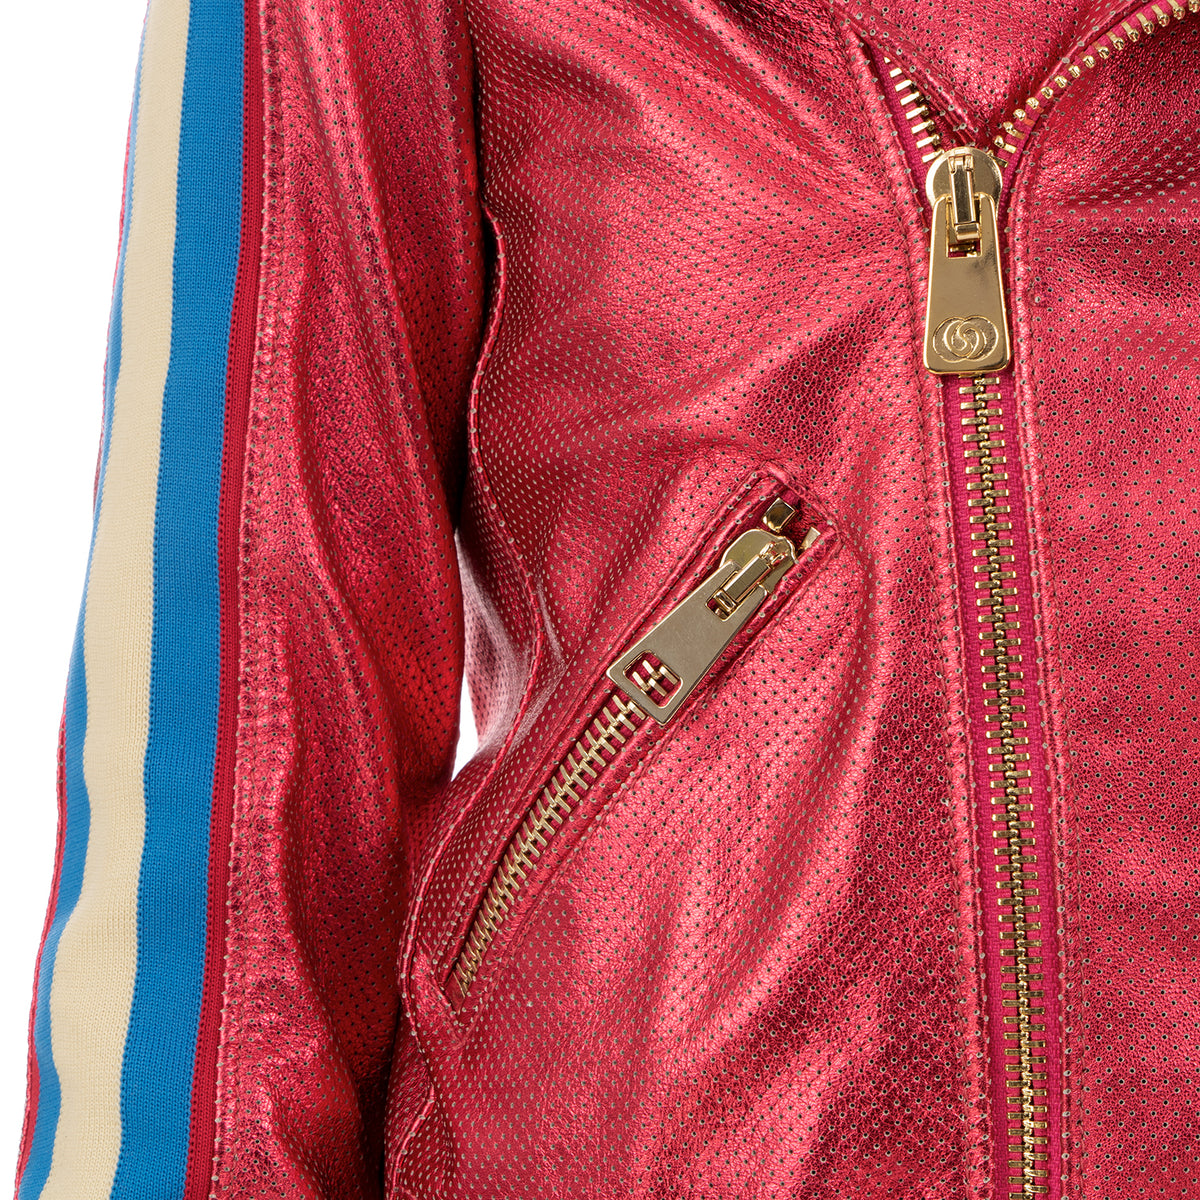 CocoCloude | Nail Perforated w/ Bands Leather Jacket Strawberry Red - Concrete